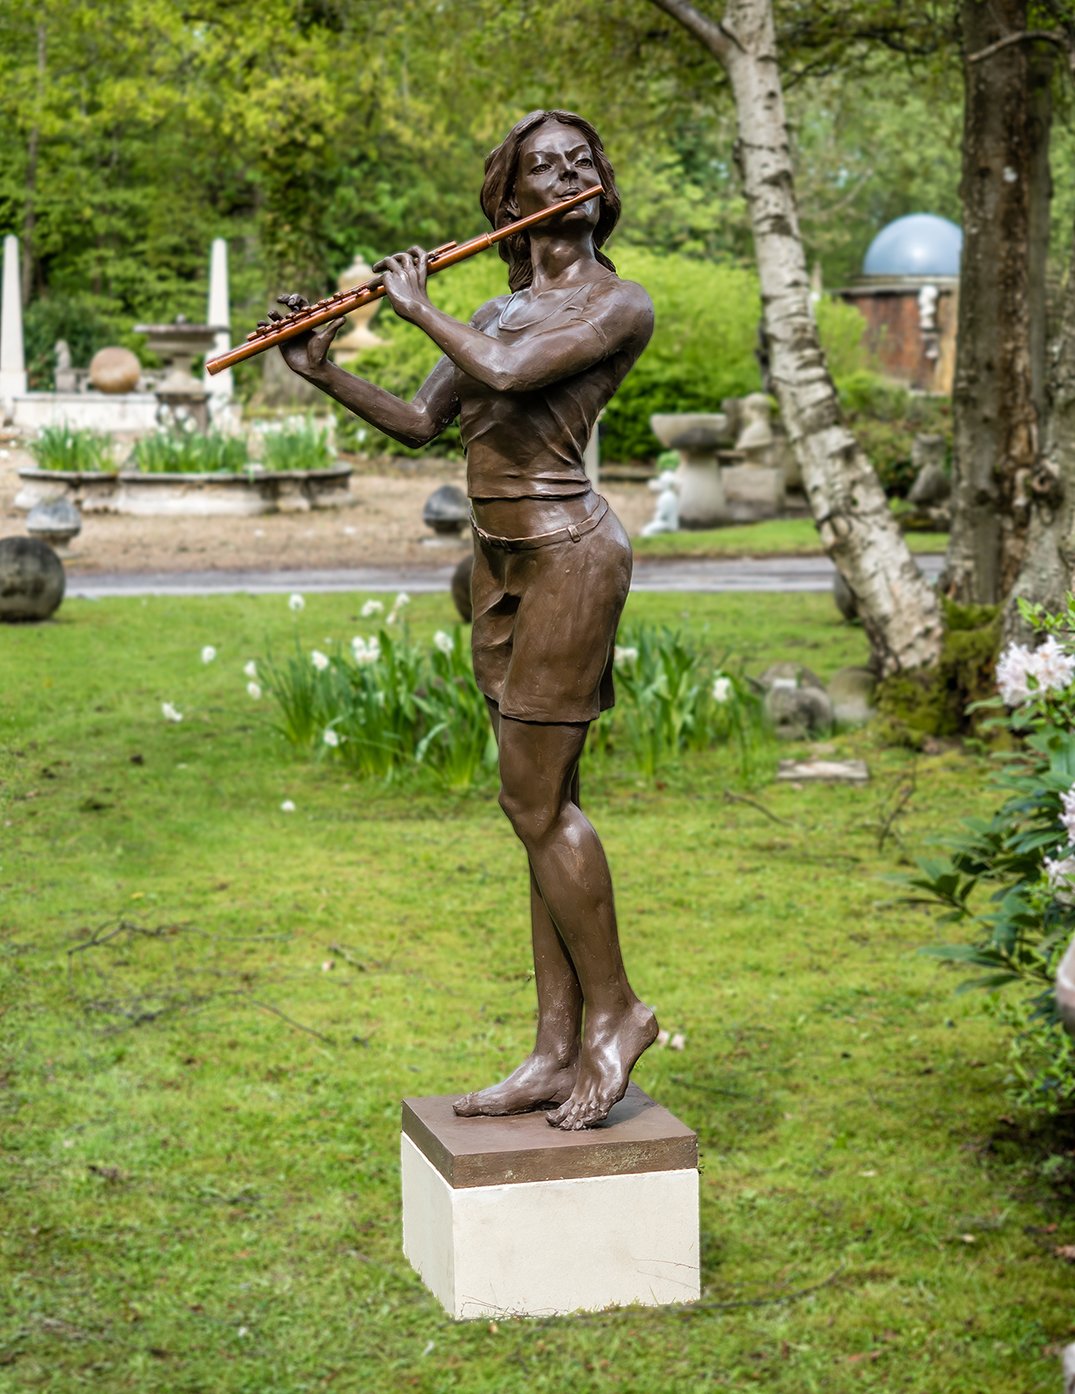 Replica bronze sculpture of a woman playing a flute standing on a concrete base with daffodils in background